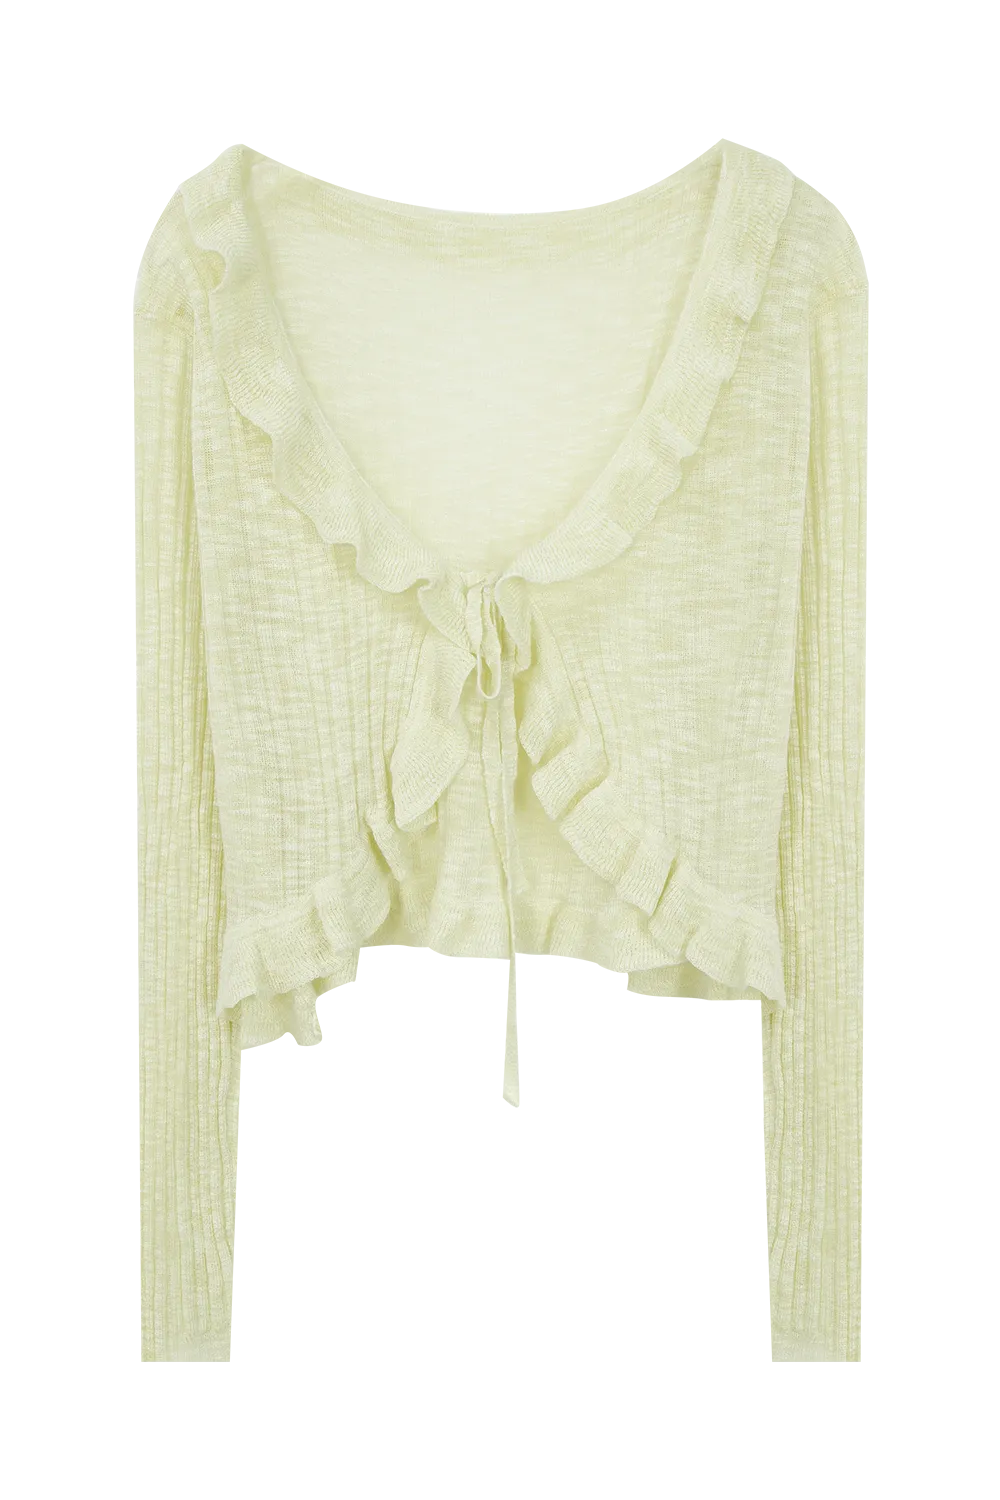 Women's Textured Long Sleeve Top with Ruffle Neckline and Tie Detail